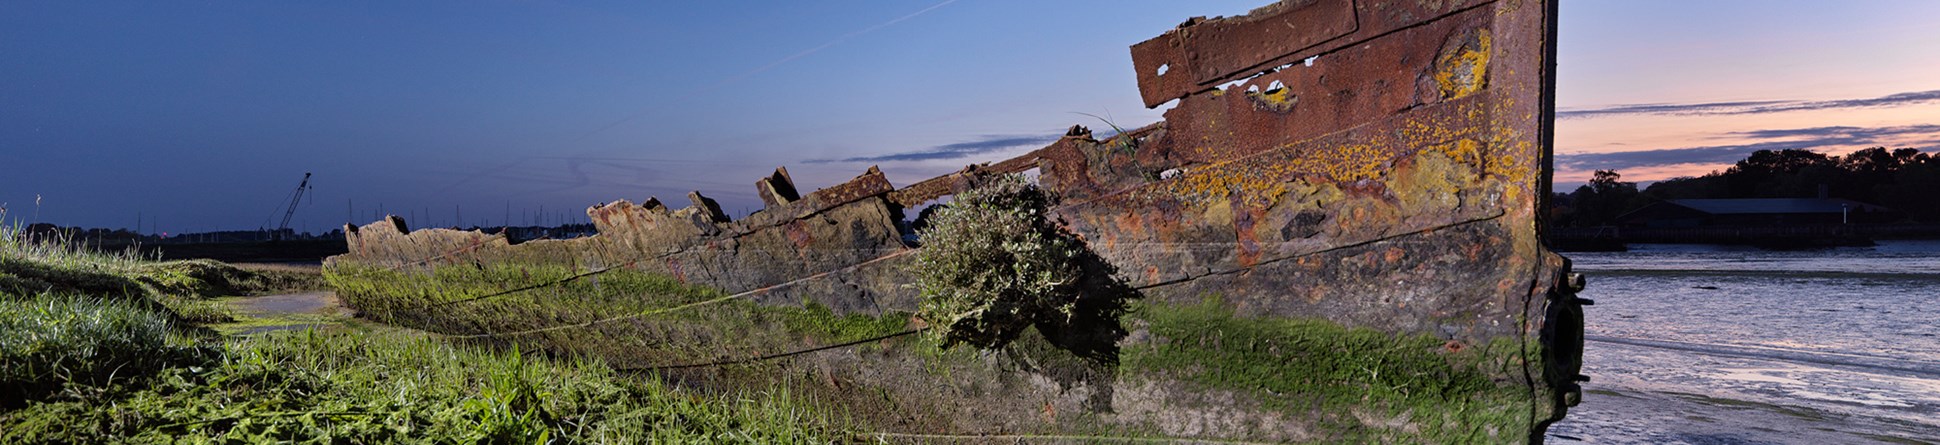 A rusting iron-shod ship hull stands on a shore, with vegetation in the foreground and a water channel beyond. 